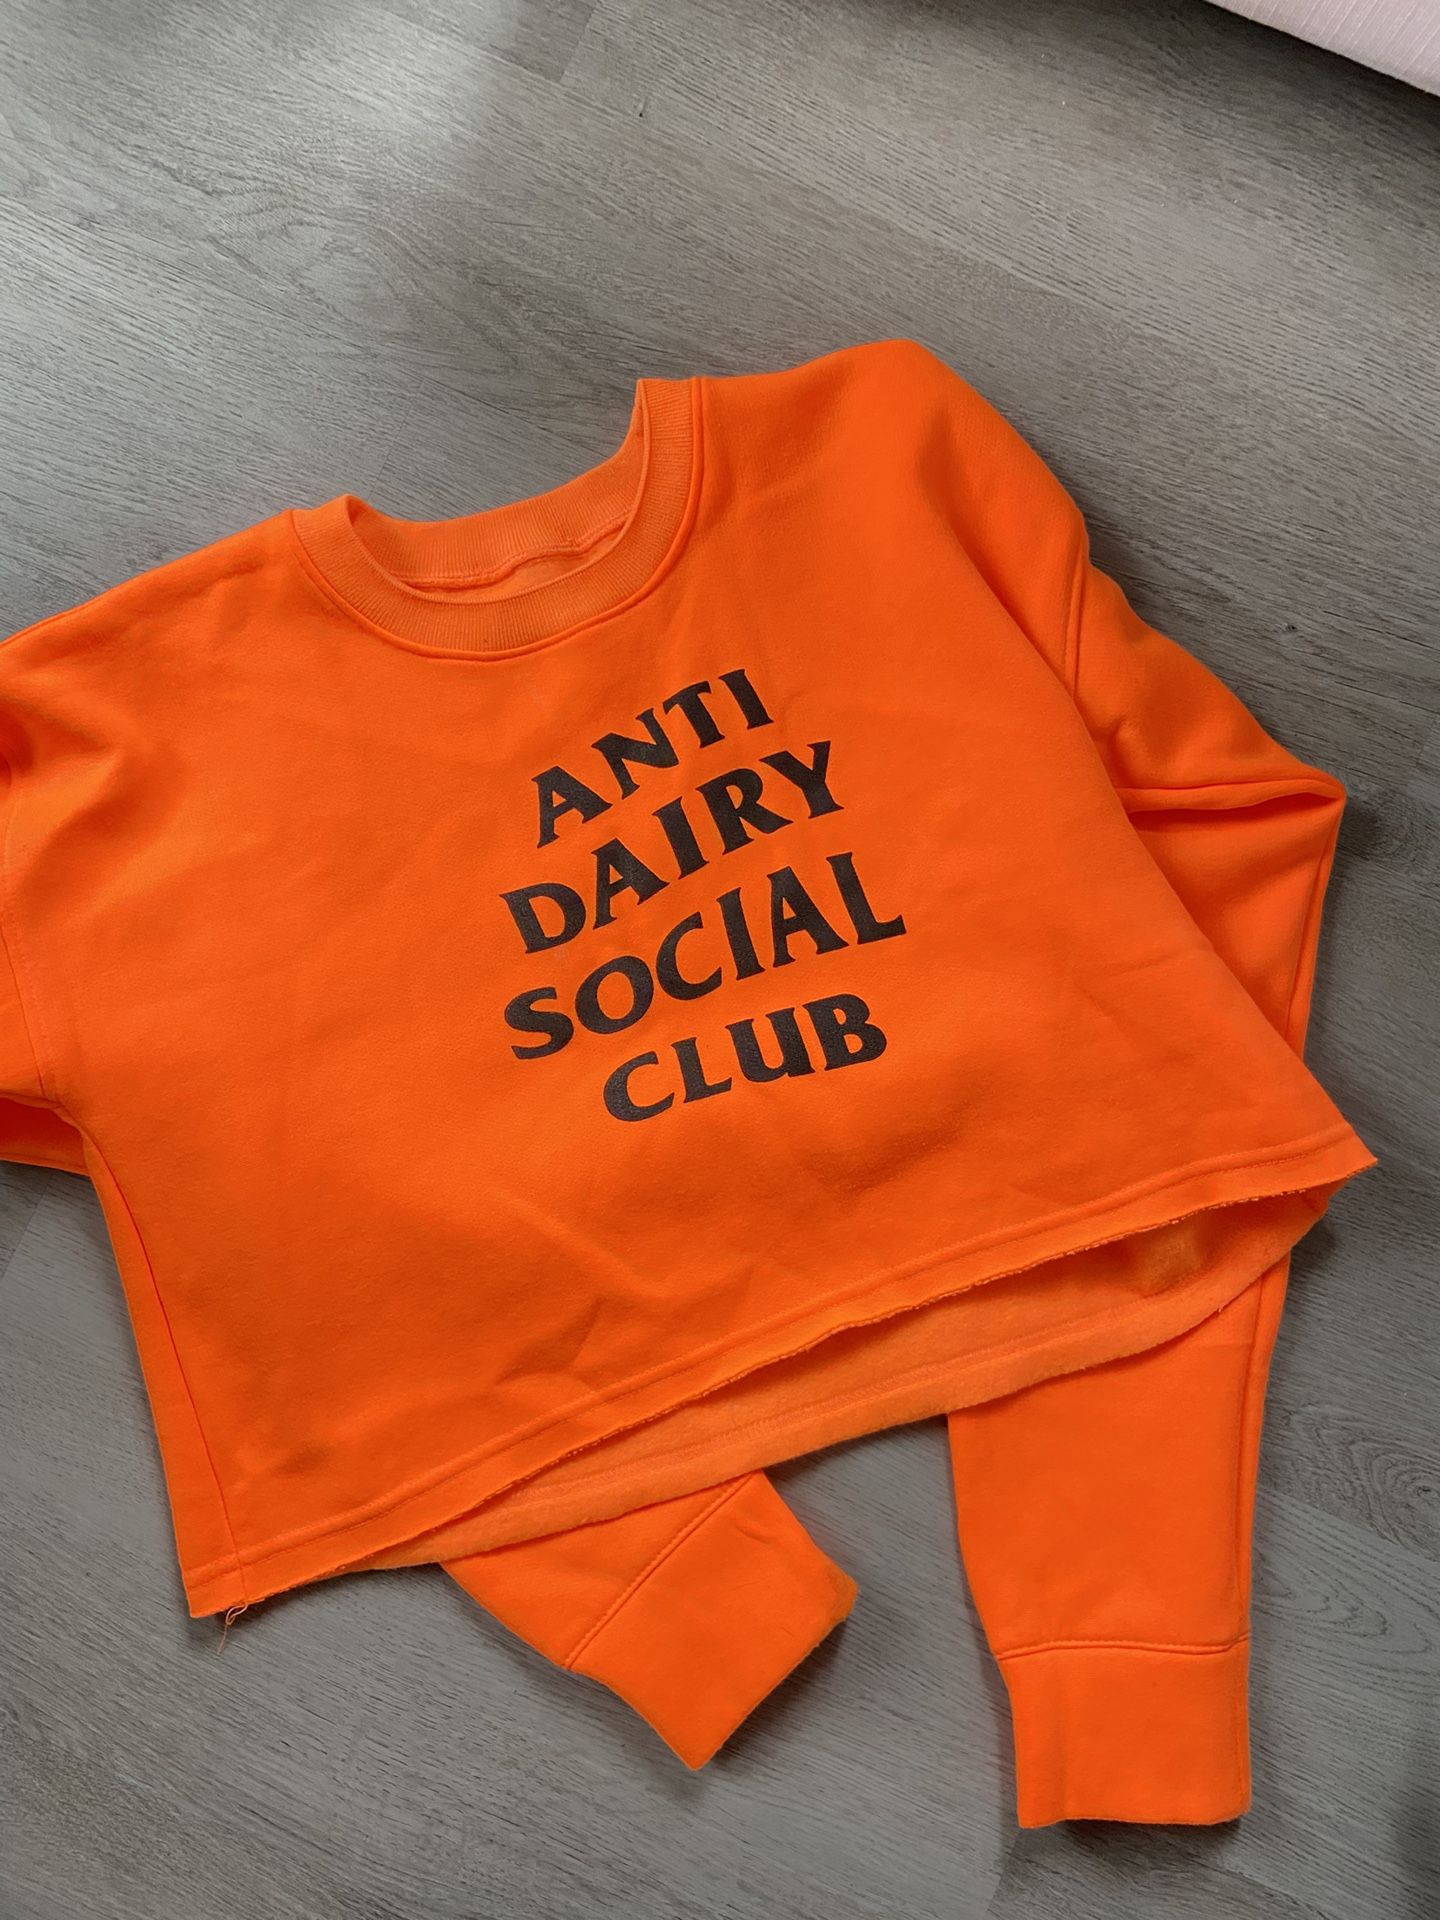 Orange Cropped Anti Dairy Social Club Sweater for Sale in Bell Gardens, CA  - OfferUp